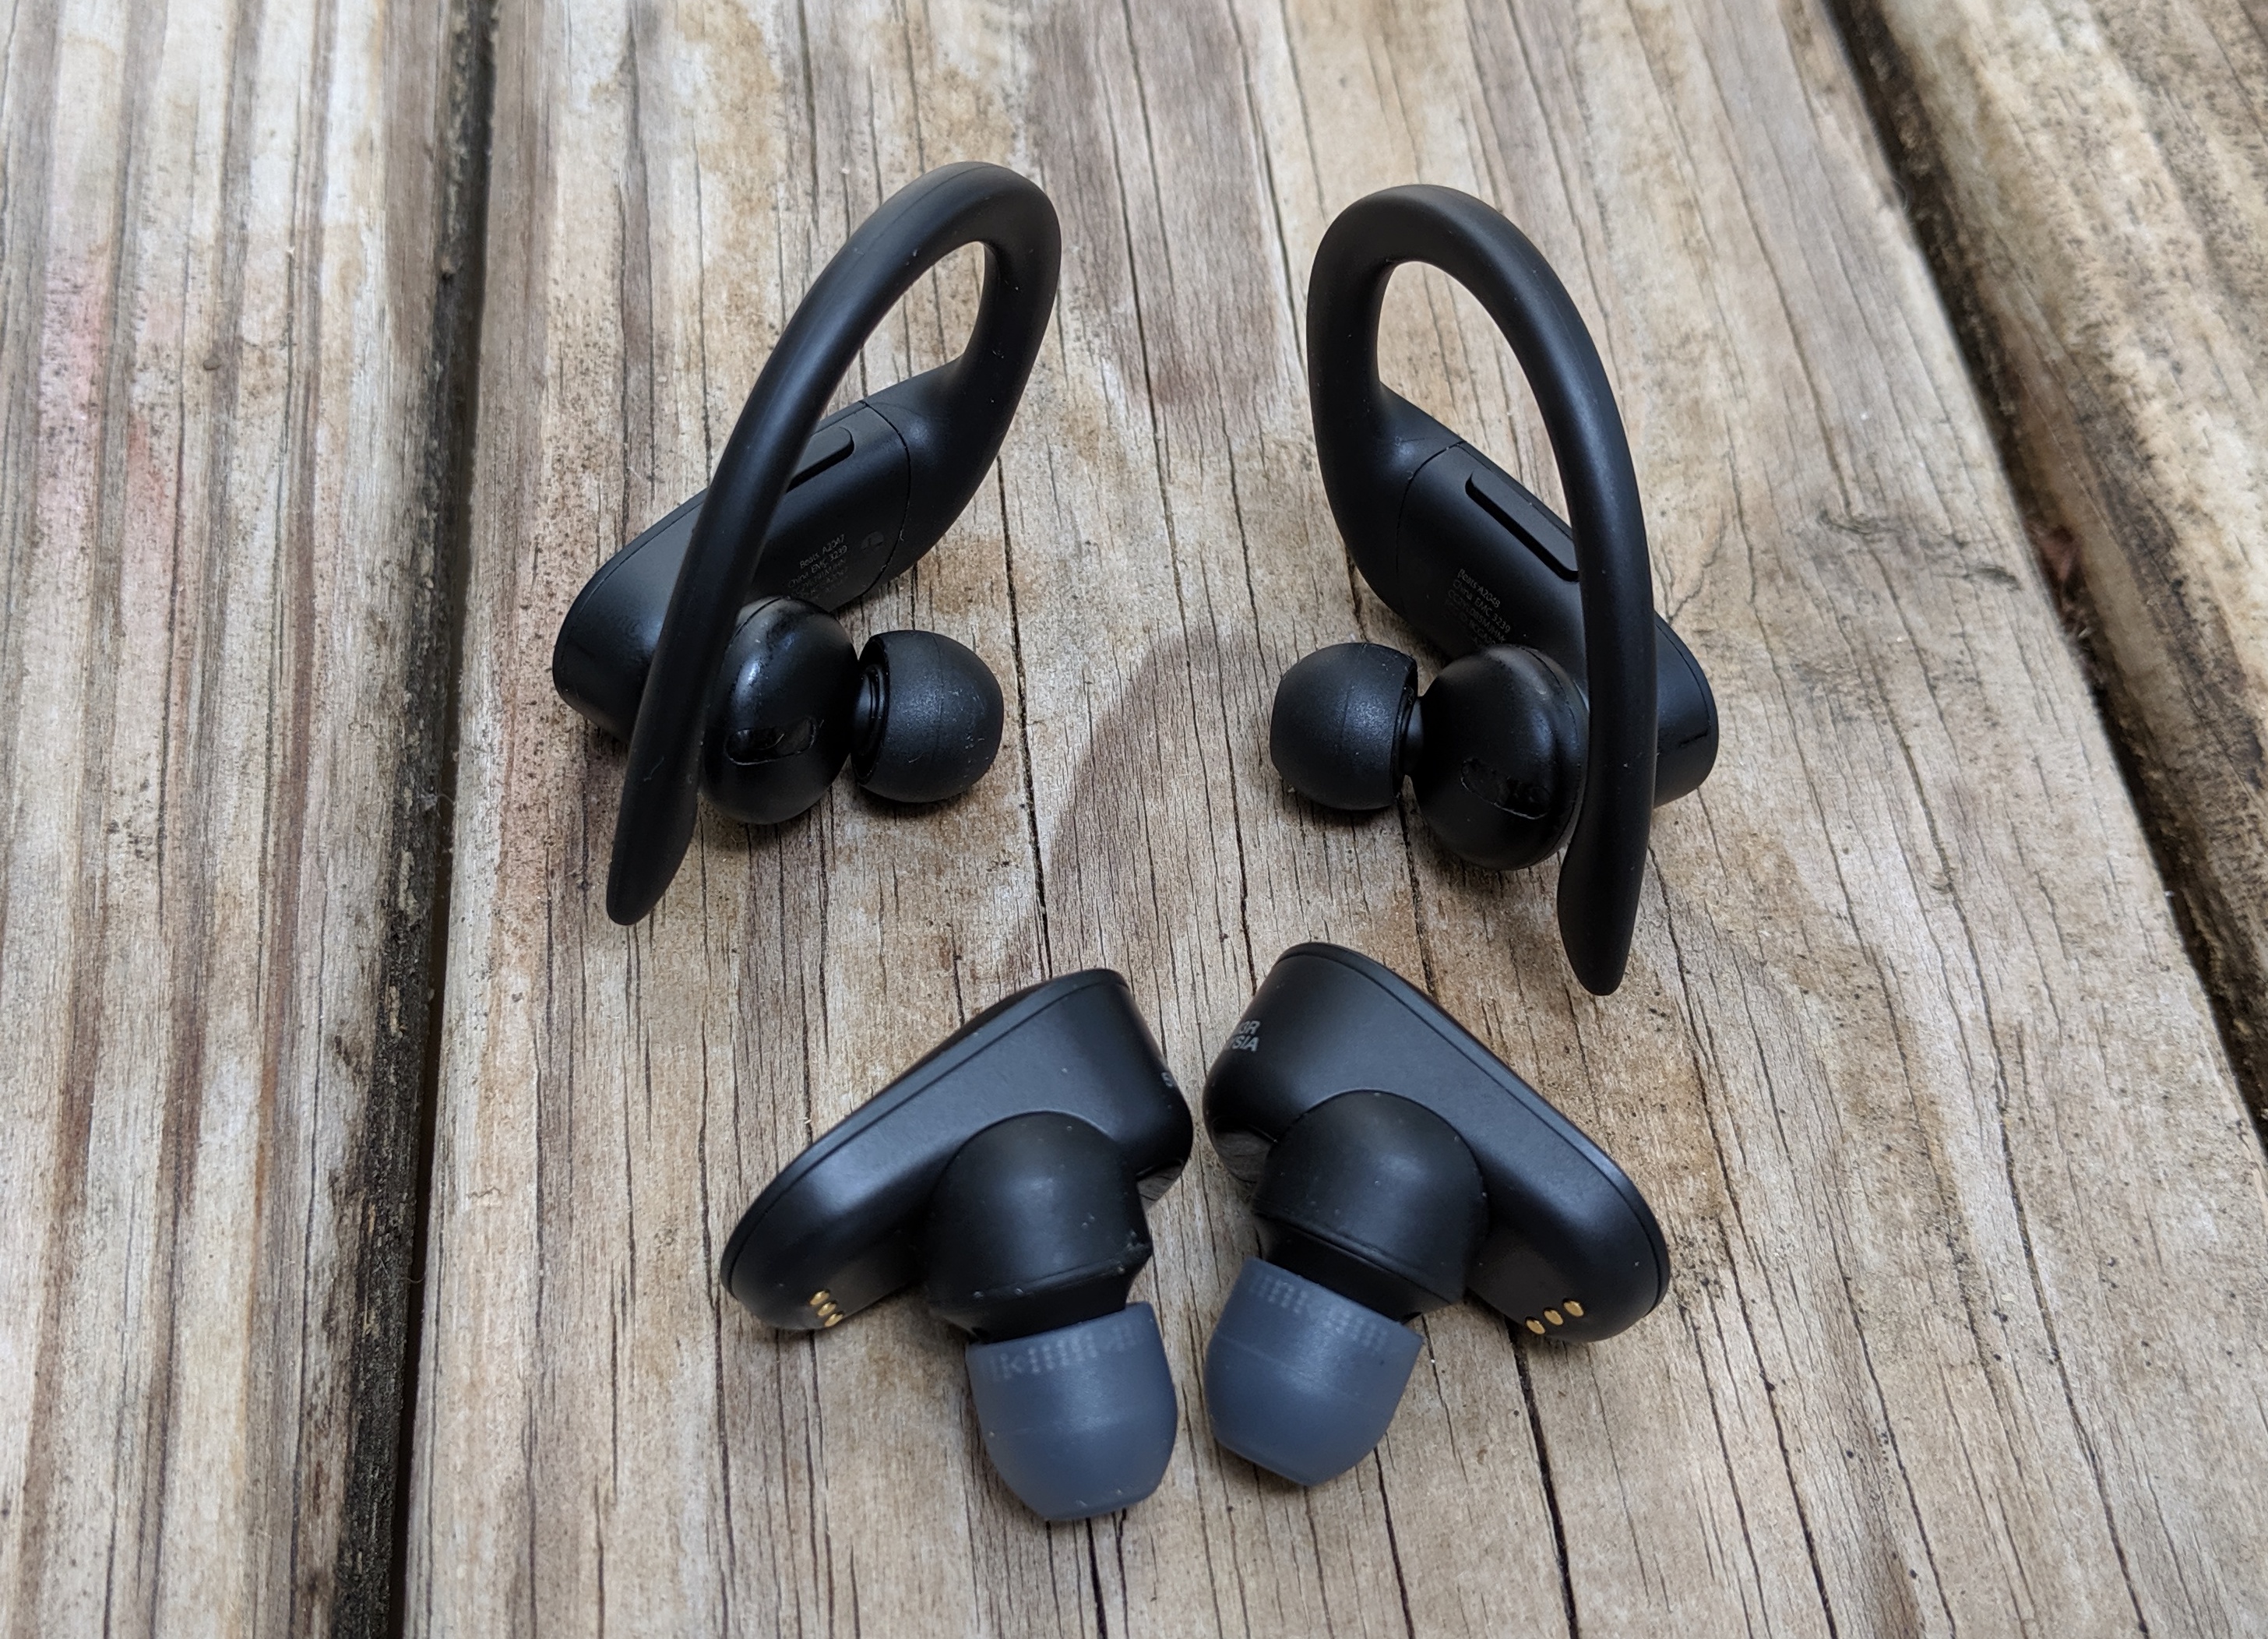 Review: Sony WF-1000XM3 true wireless noise-canceling earbuds are